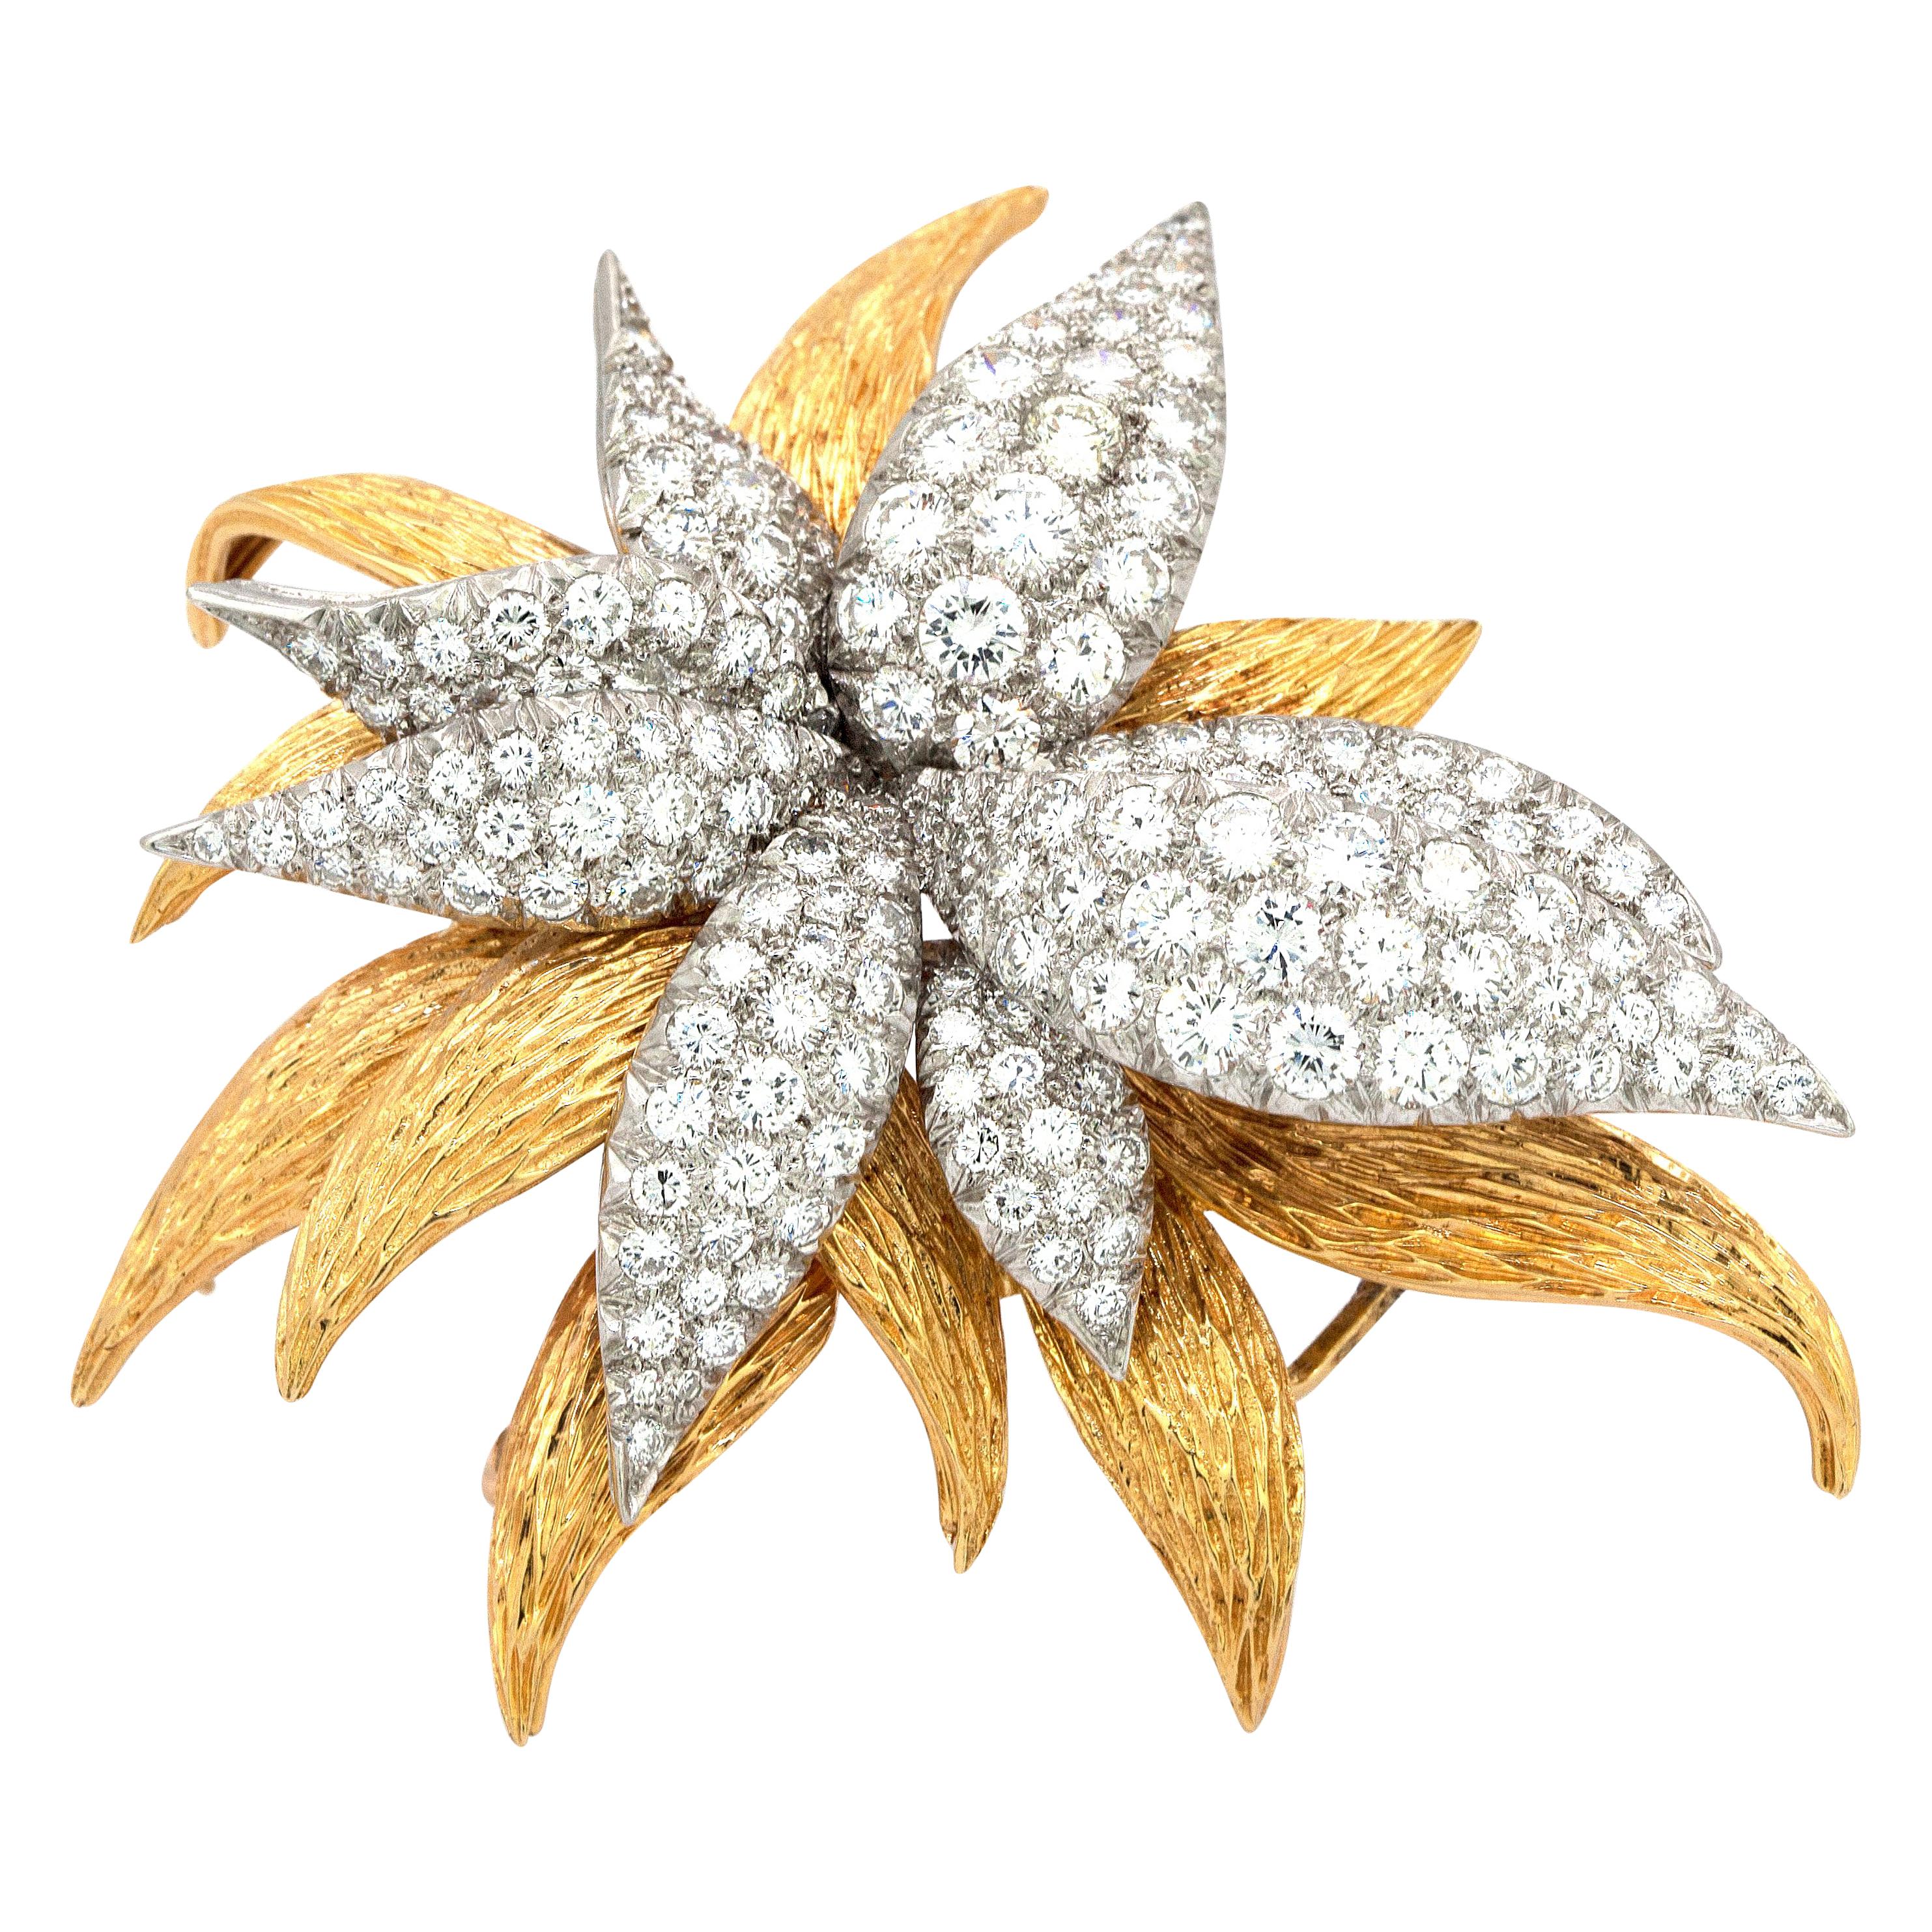 11 Carat White Diamonds Flower French Brooch or Pin For Sale